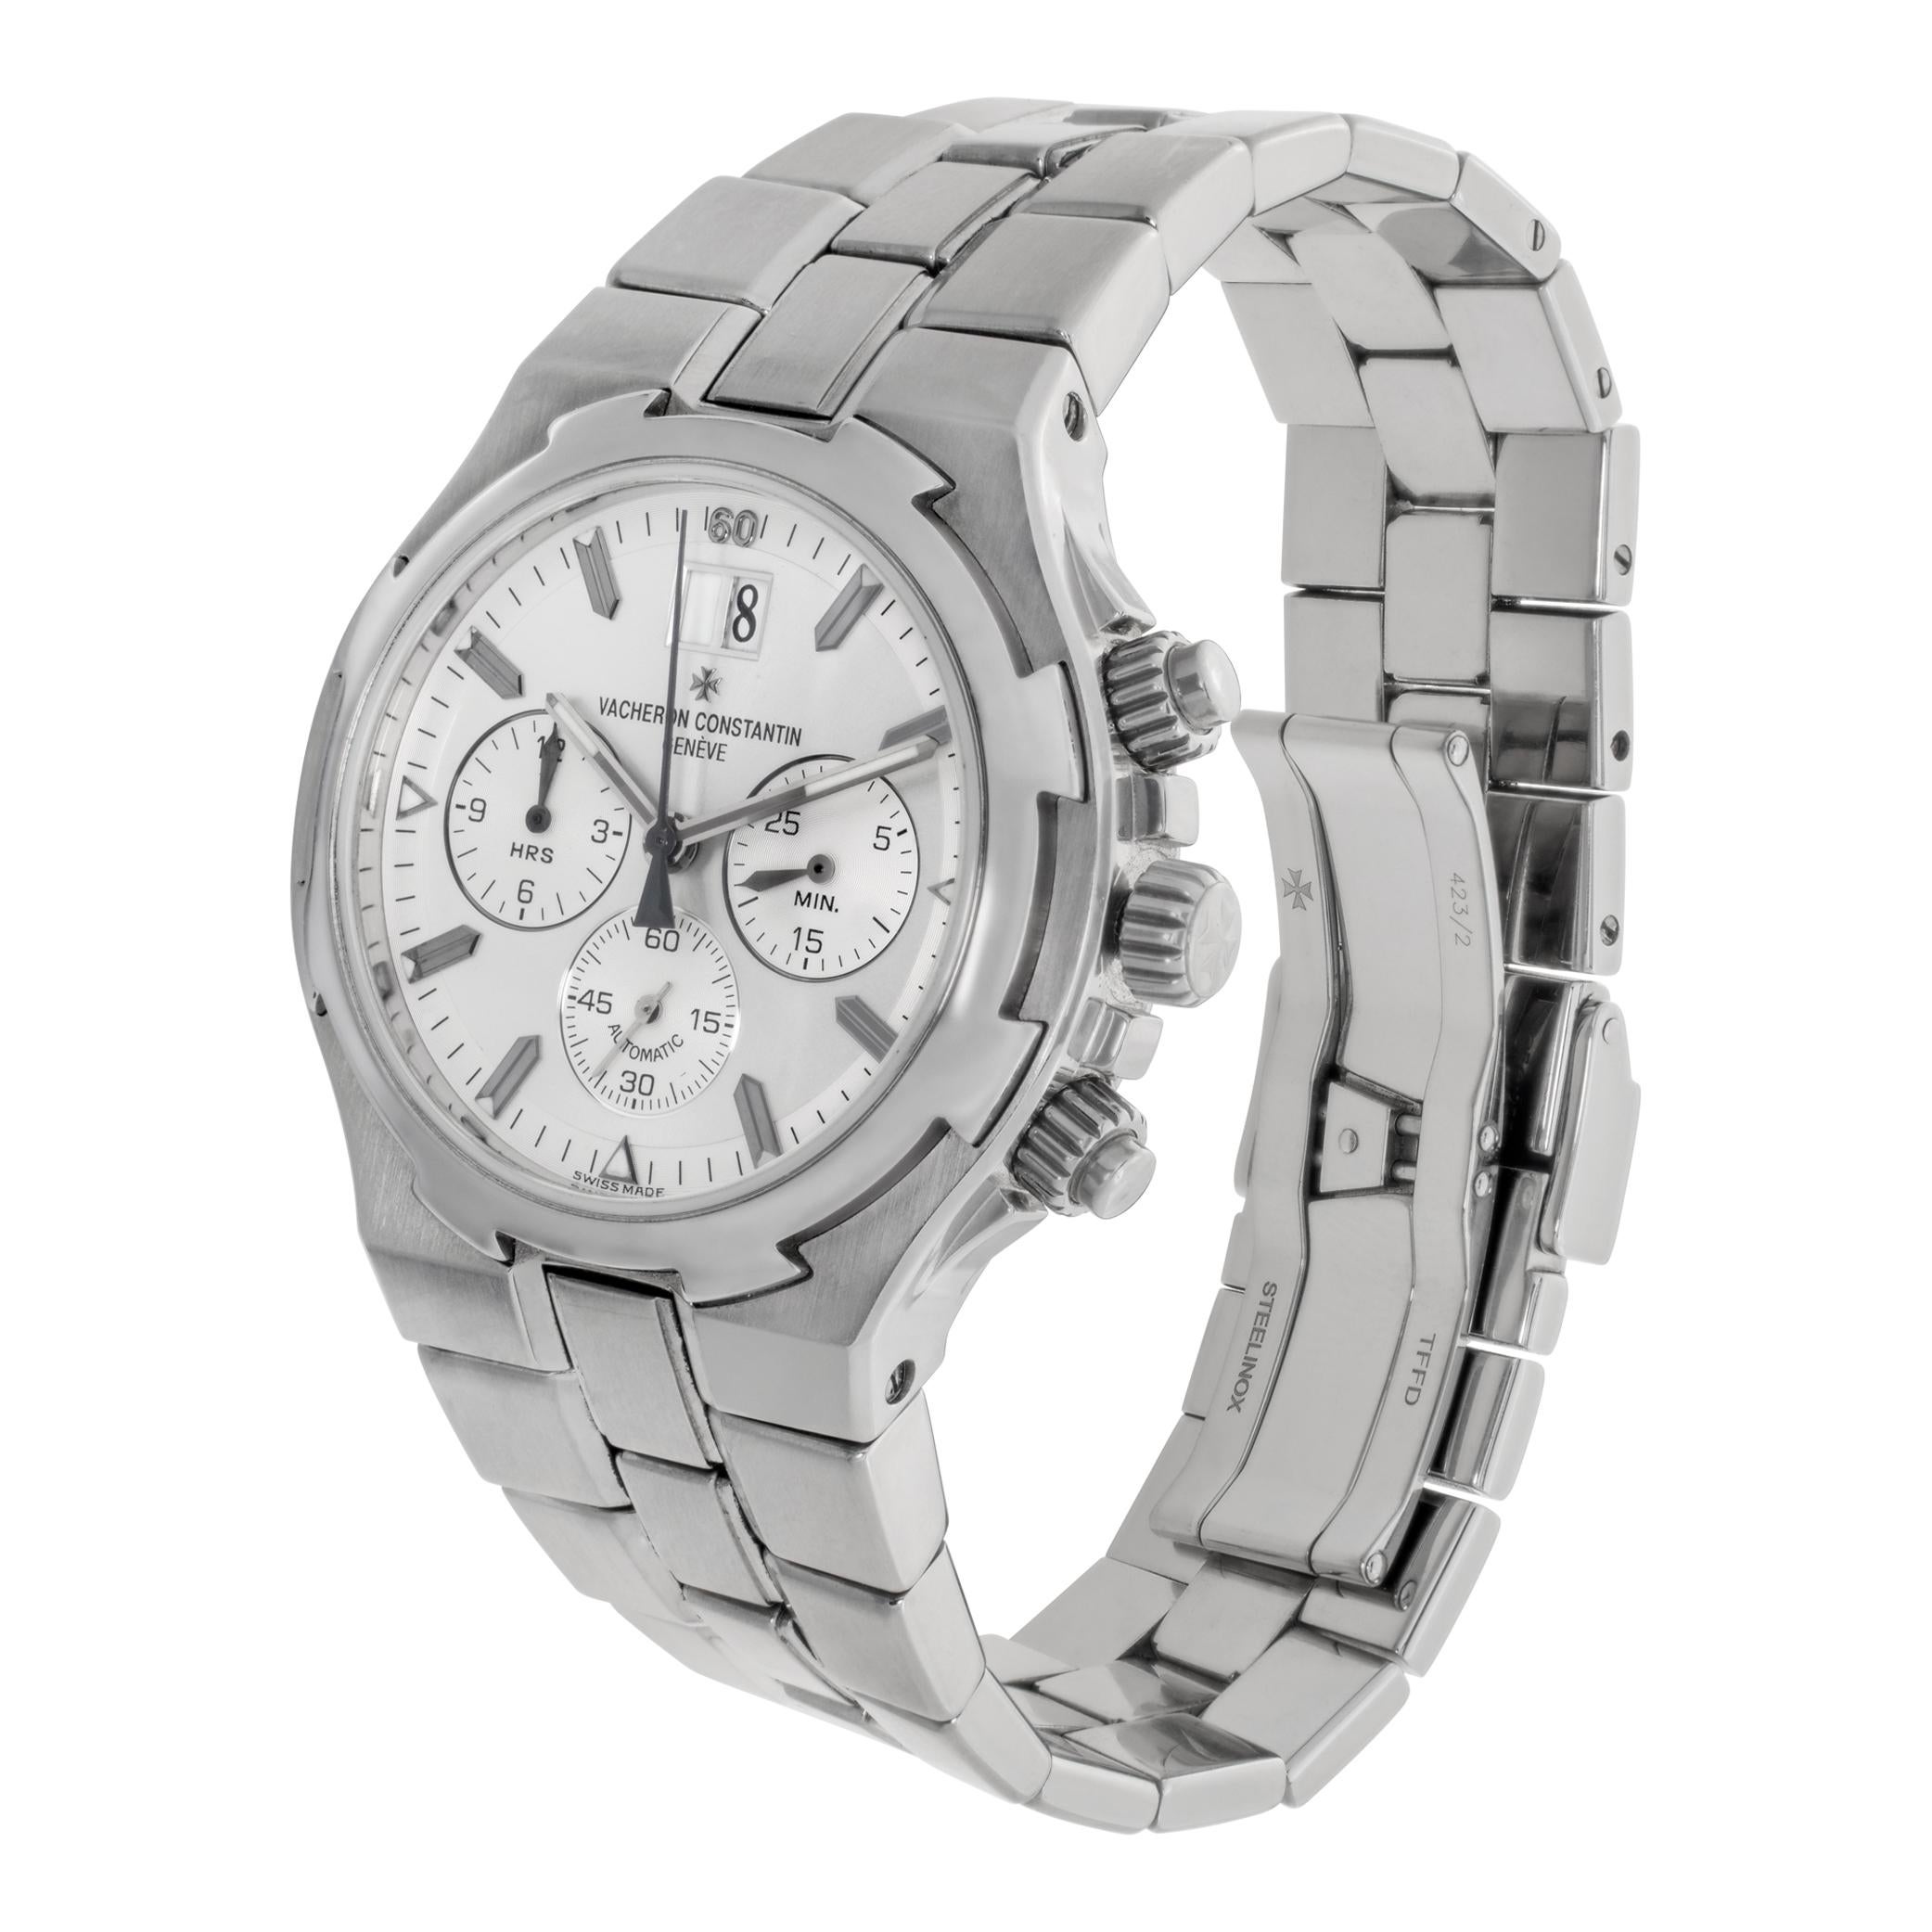 Vacheron Constantin Overseas Chronograph in stainless steel with a big date. Auto w/ subseconds, date and chronograph. 42 mm case size. Ref 49140-423a. Fine Pre-owned Vacheron Constantin Watch.

 Certified preowned Sport Vacheron Constantin Overseas